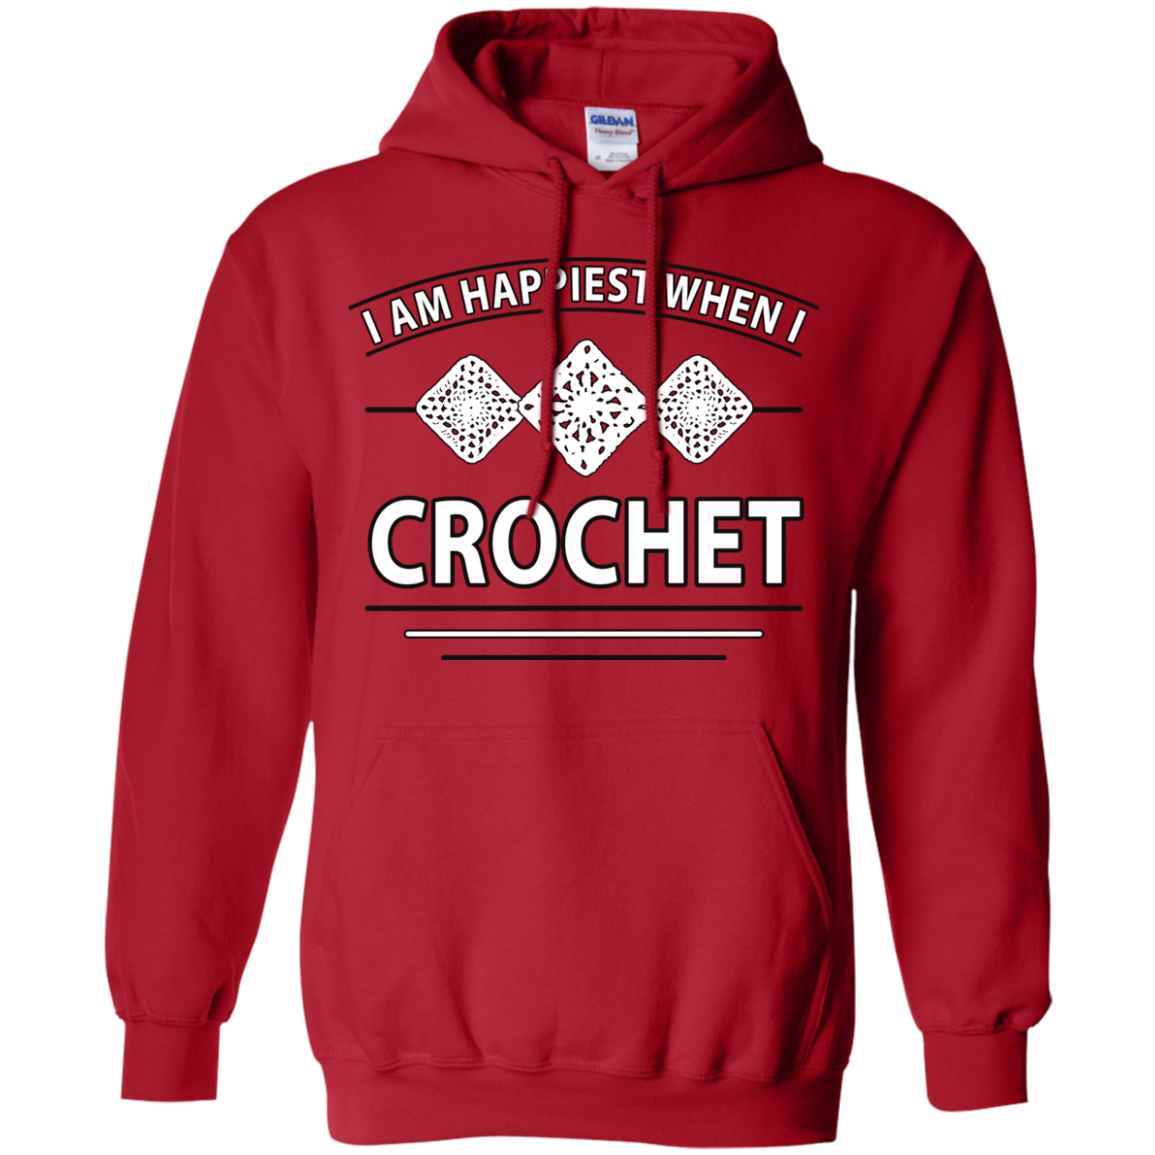 I Am Happiest When I Crochet Pullover Hoodies - Crafter4Life - 12